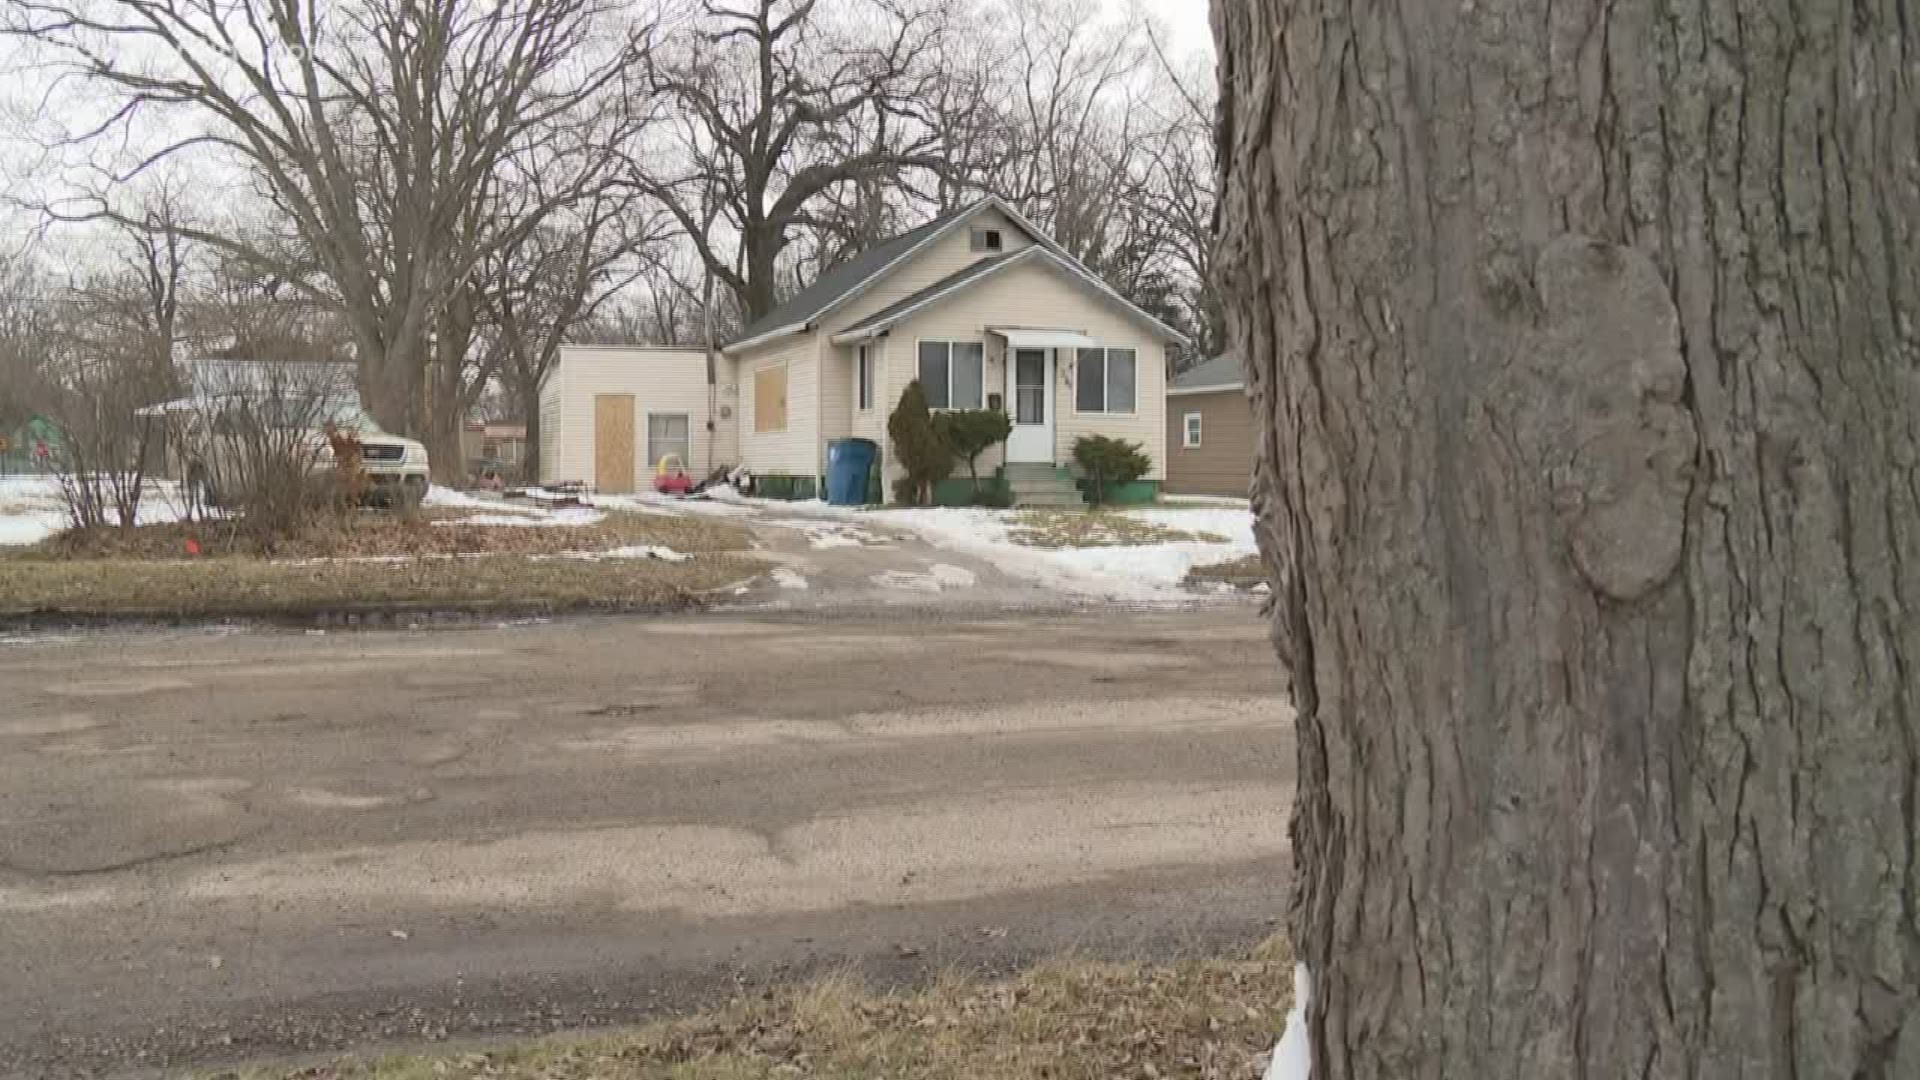 A 13-year-old was charged with second degree arson for fire Saturday night in Muskegon Heights